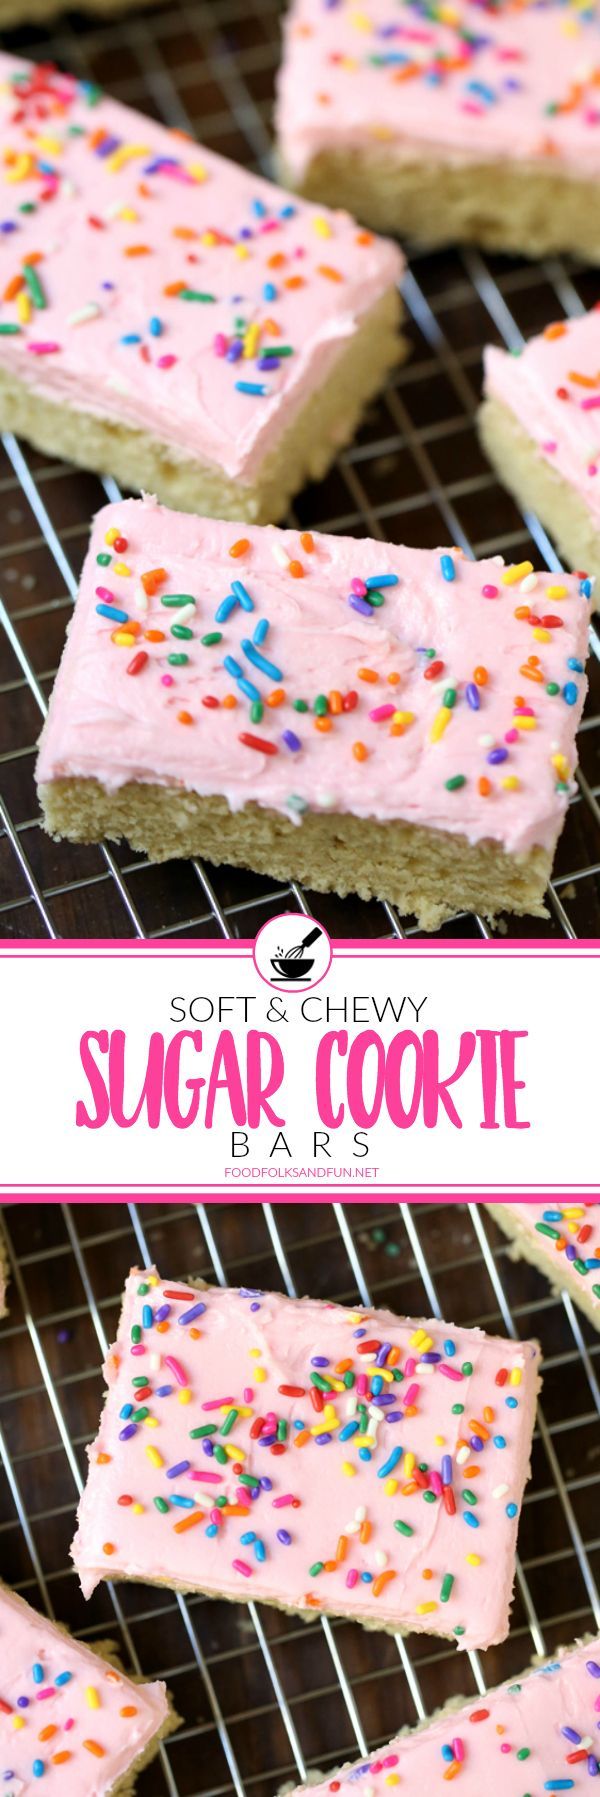 Soft & Chewy Sugar Cookie Bars